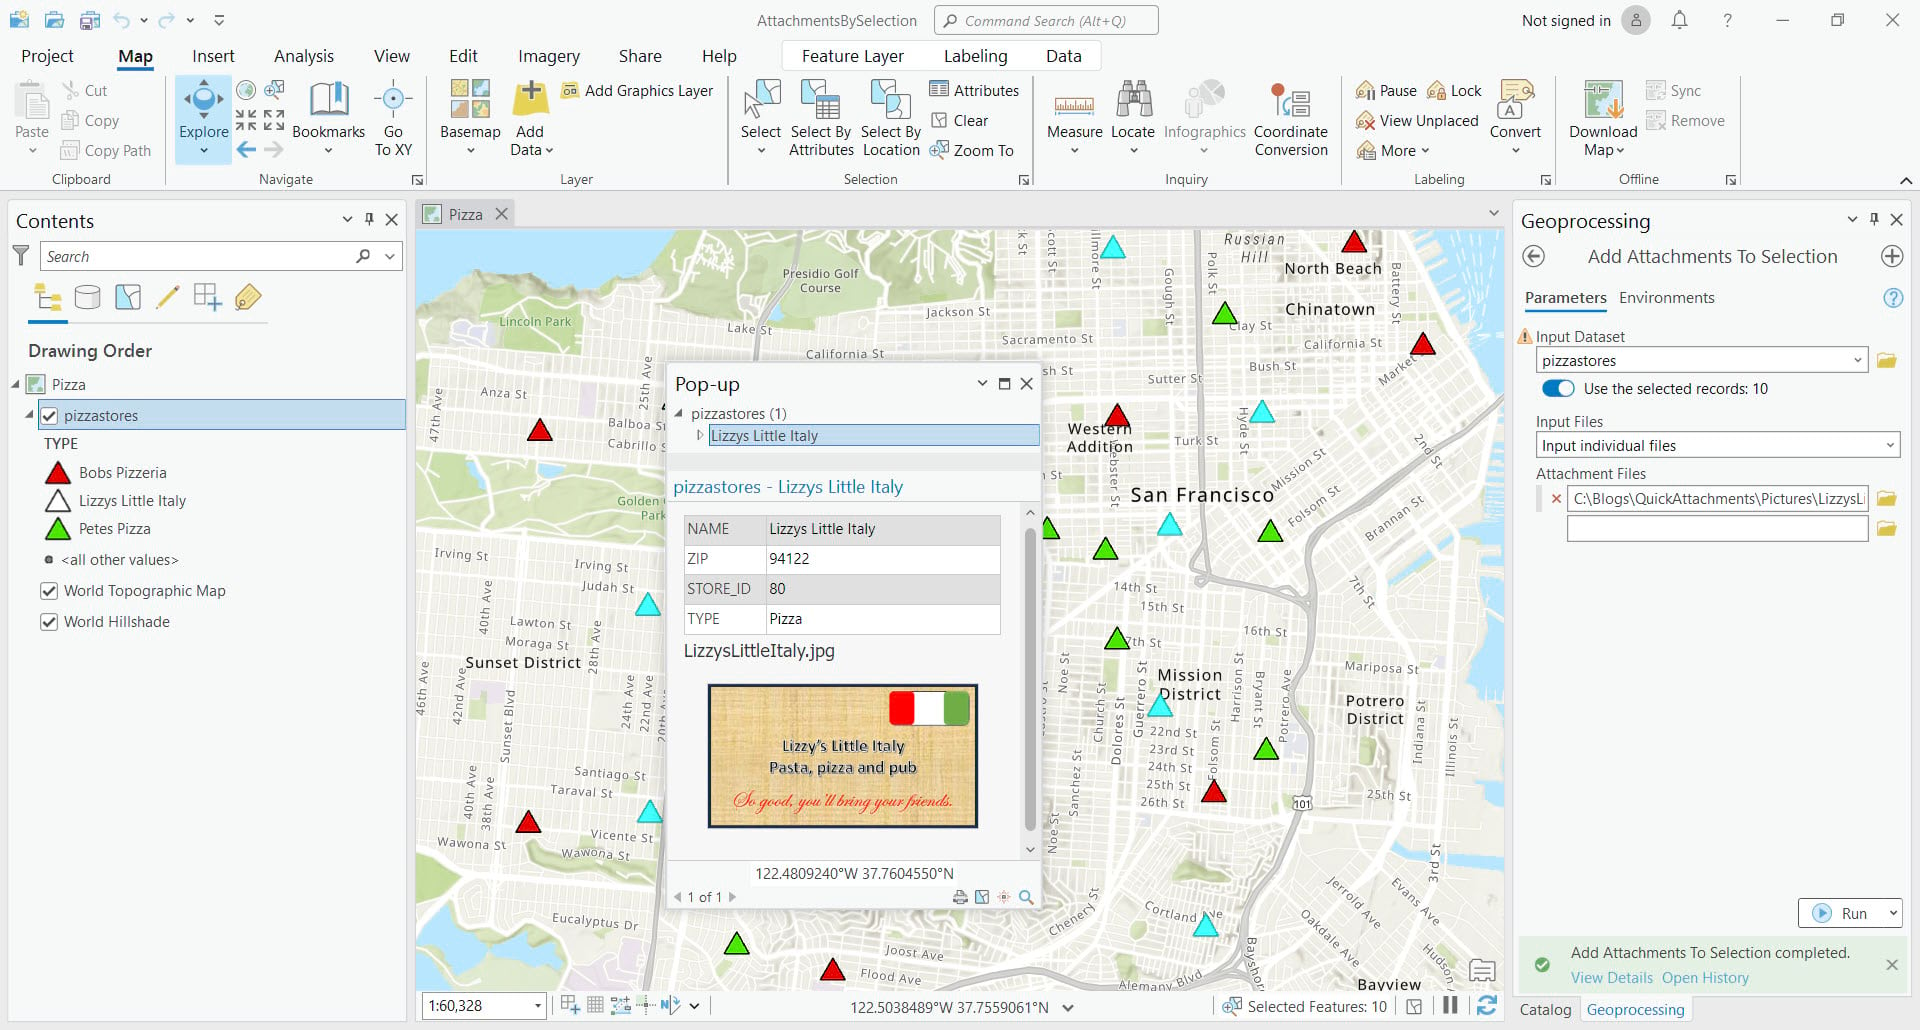 ArcGIS Pro interface with Map View and an open Pop-up window displaying the added attachments to all selected features.